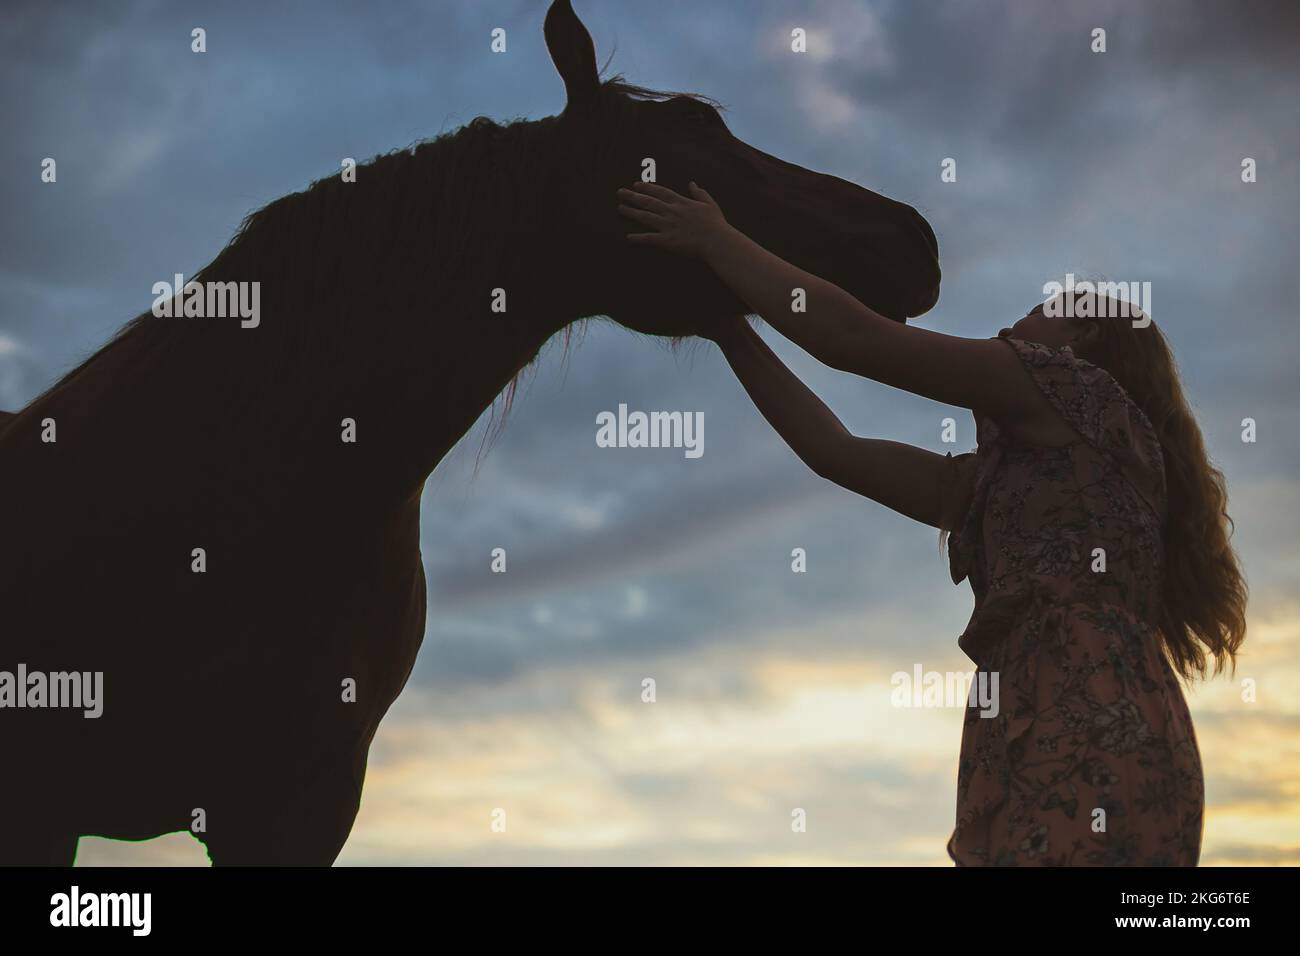 Woman caressing horse scenic photography Stock Photo